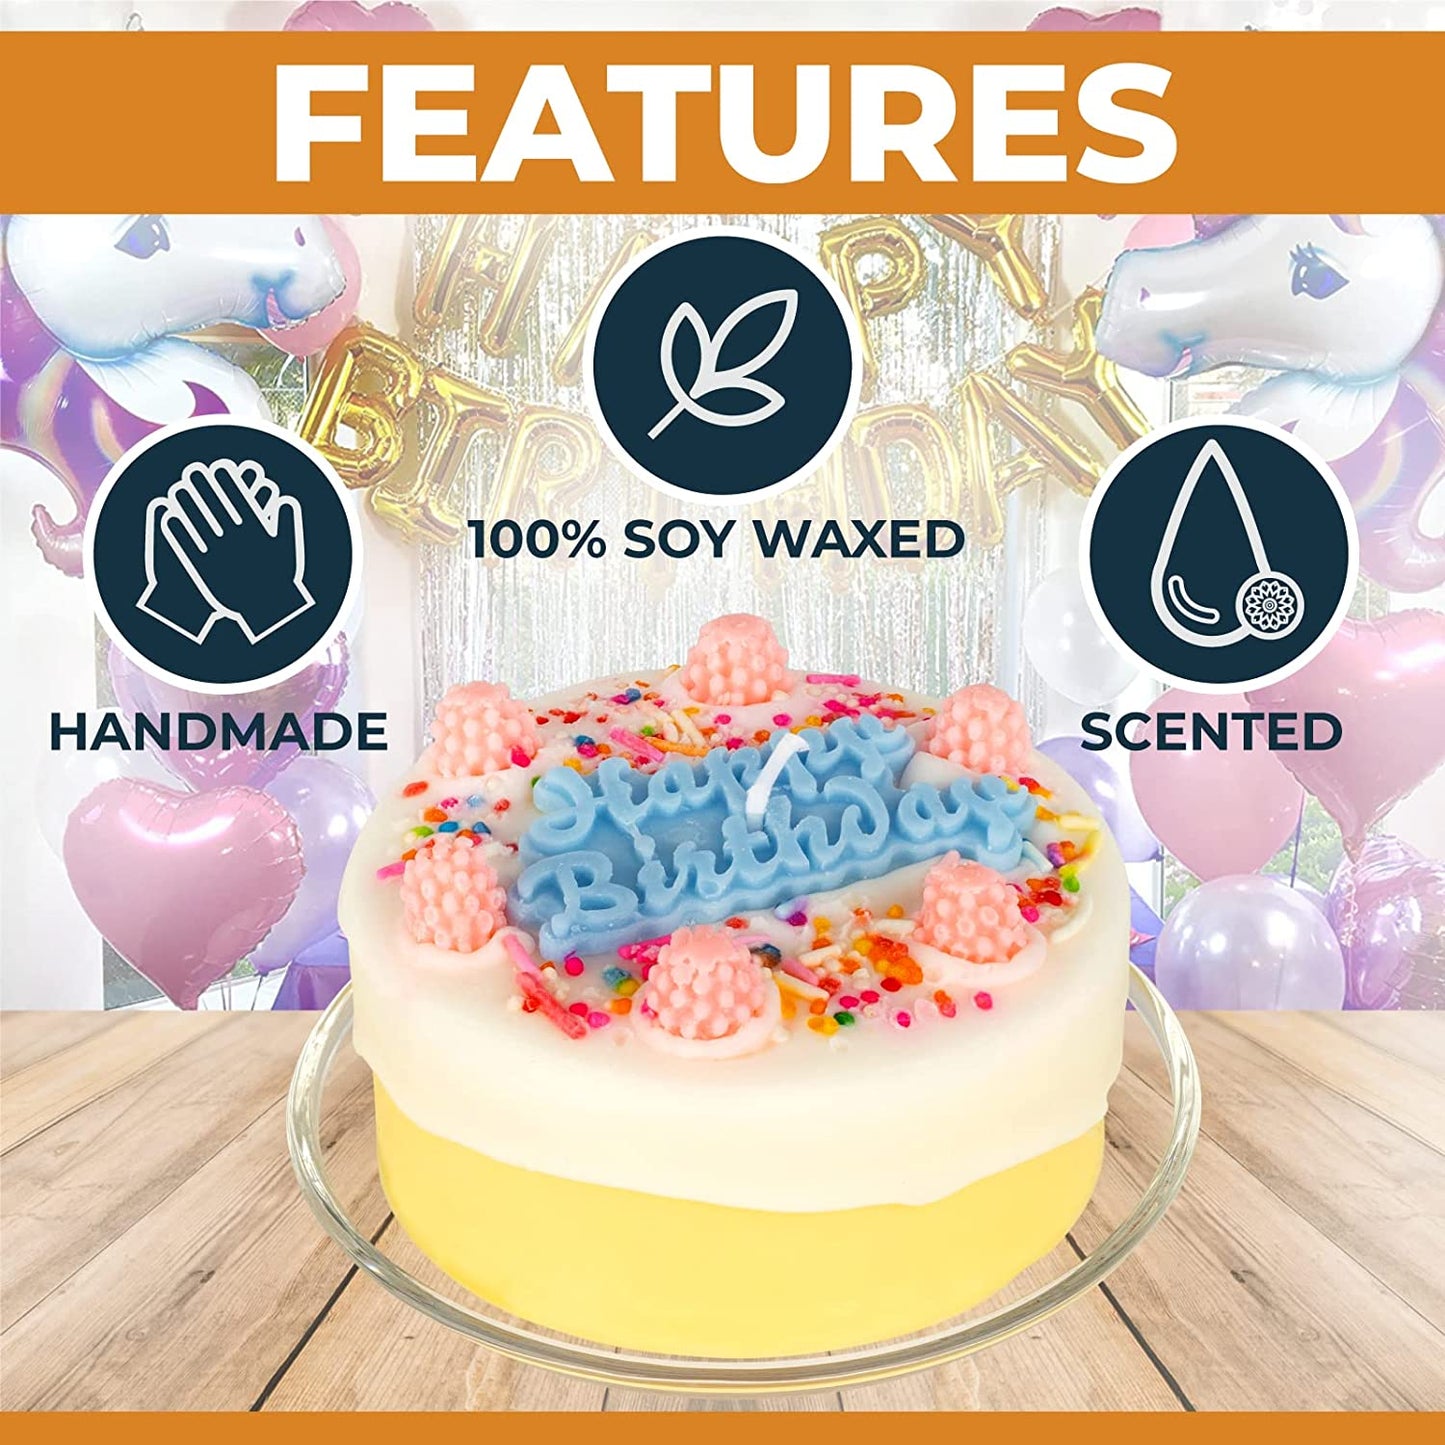 A candle shaped like a birthday cake with happy birthday written on the top of it. Also features text which says, handmade, 100% soy waxed and scented.